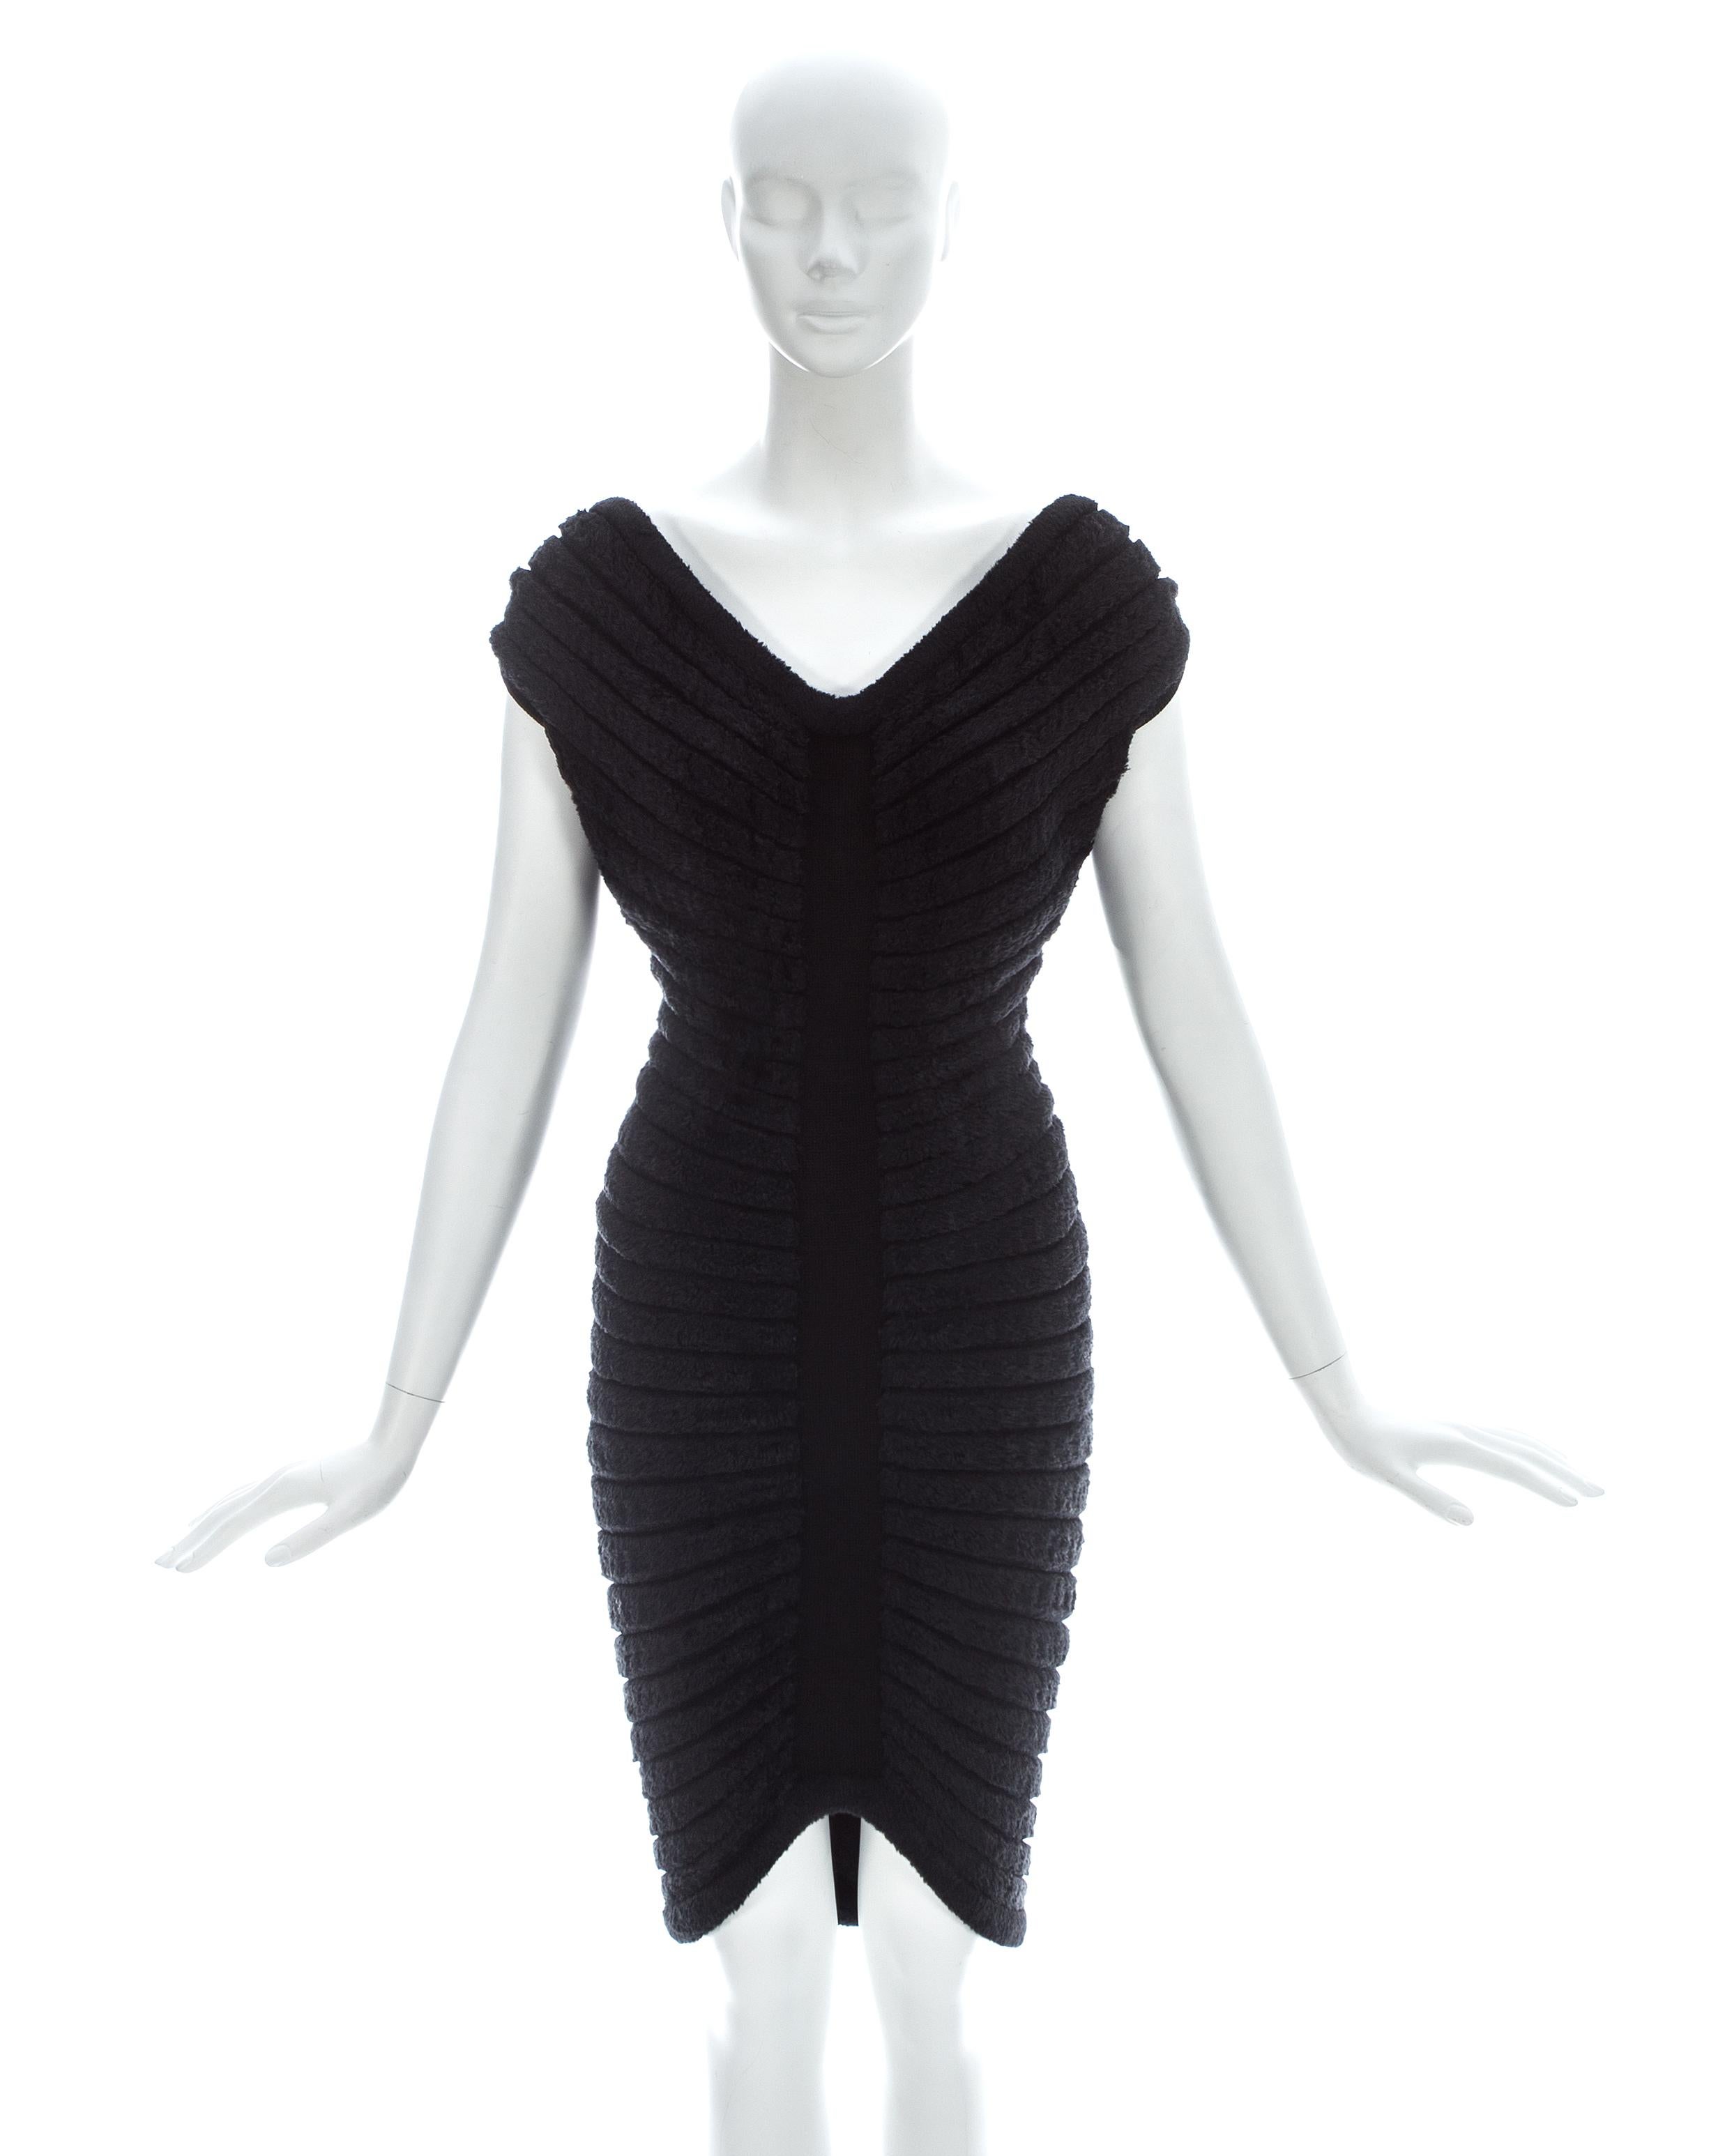 Azzedine Alaia; Black chenille-knitted figure-hugging 'Houpette' dress with radiating concentric chenille bands

Spring-Summer 1994